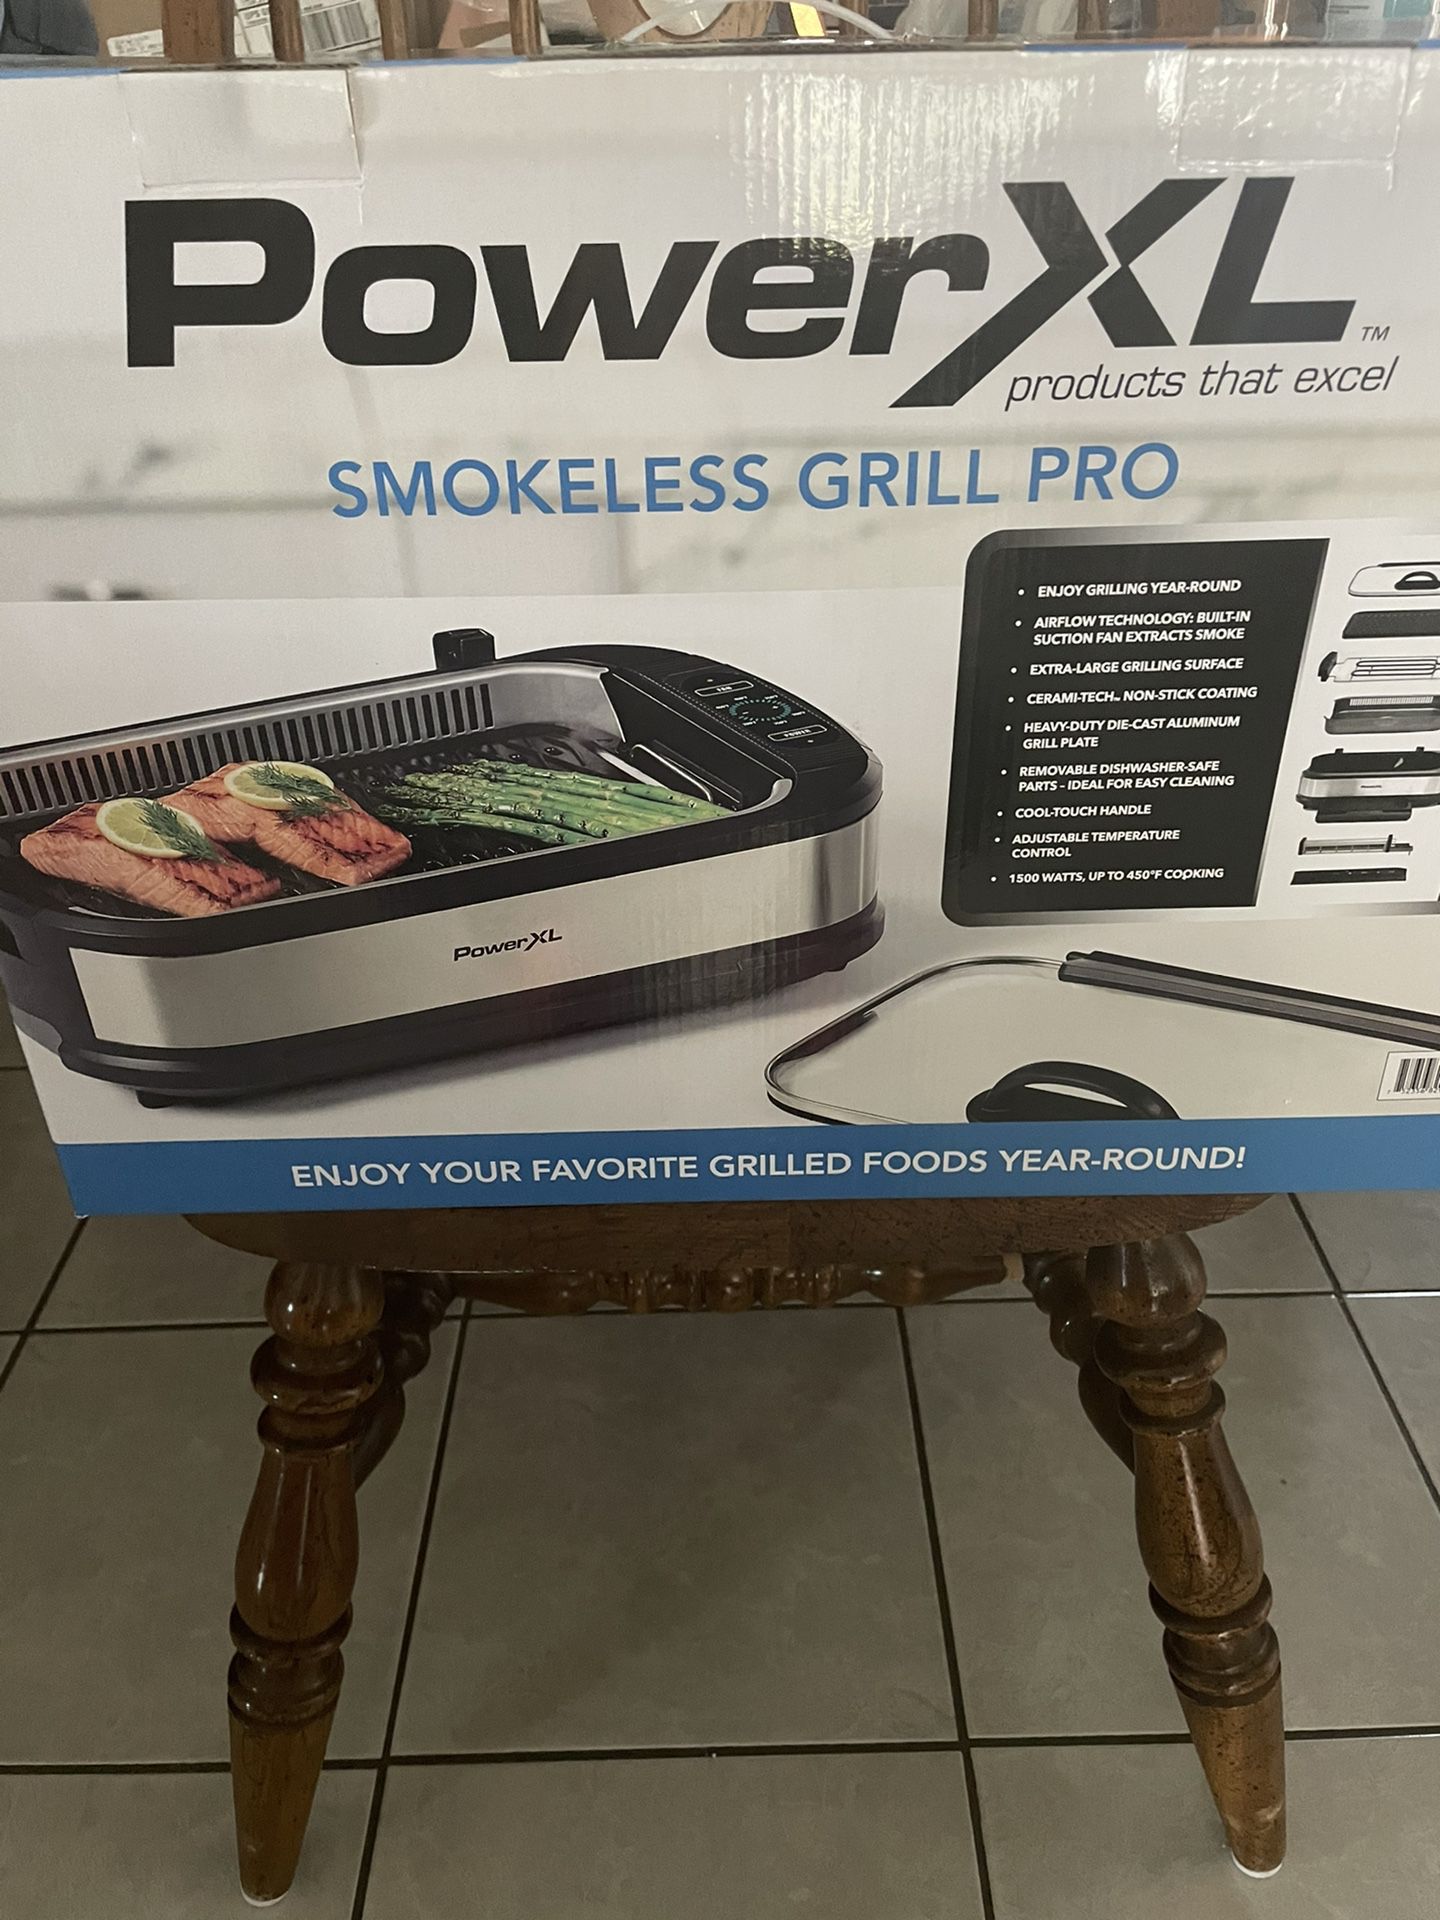 LIKE NEW! POWER XL Smokeless Grill Pro for Sale in Long Beach, CA - OfferUp